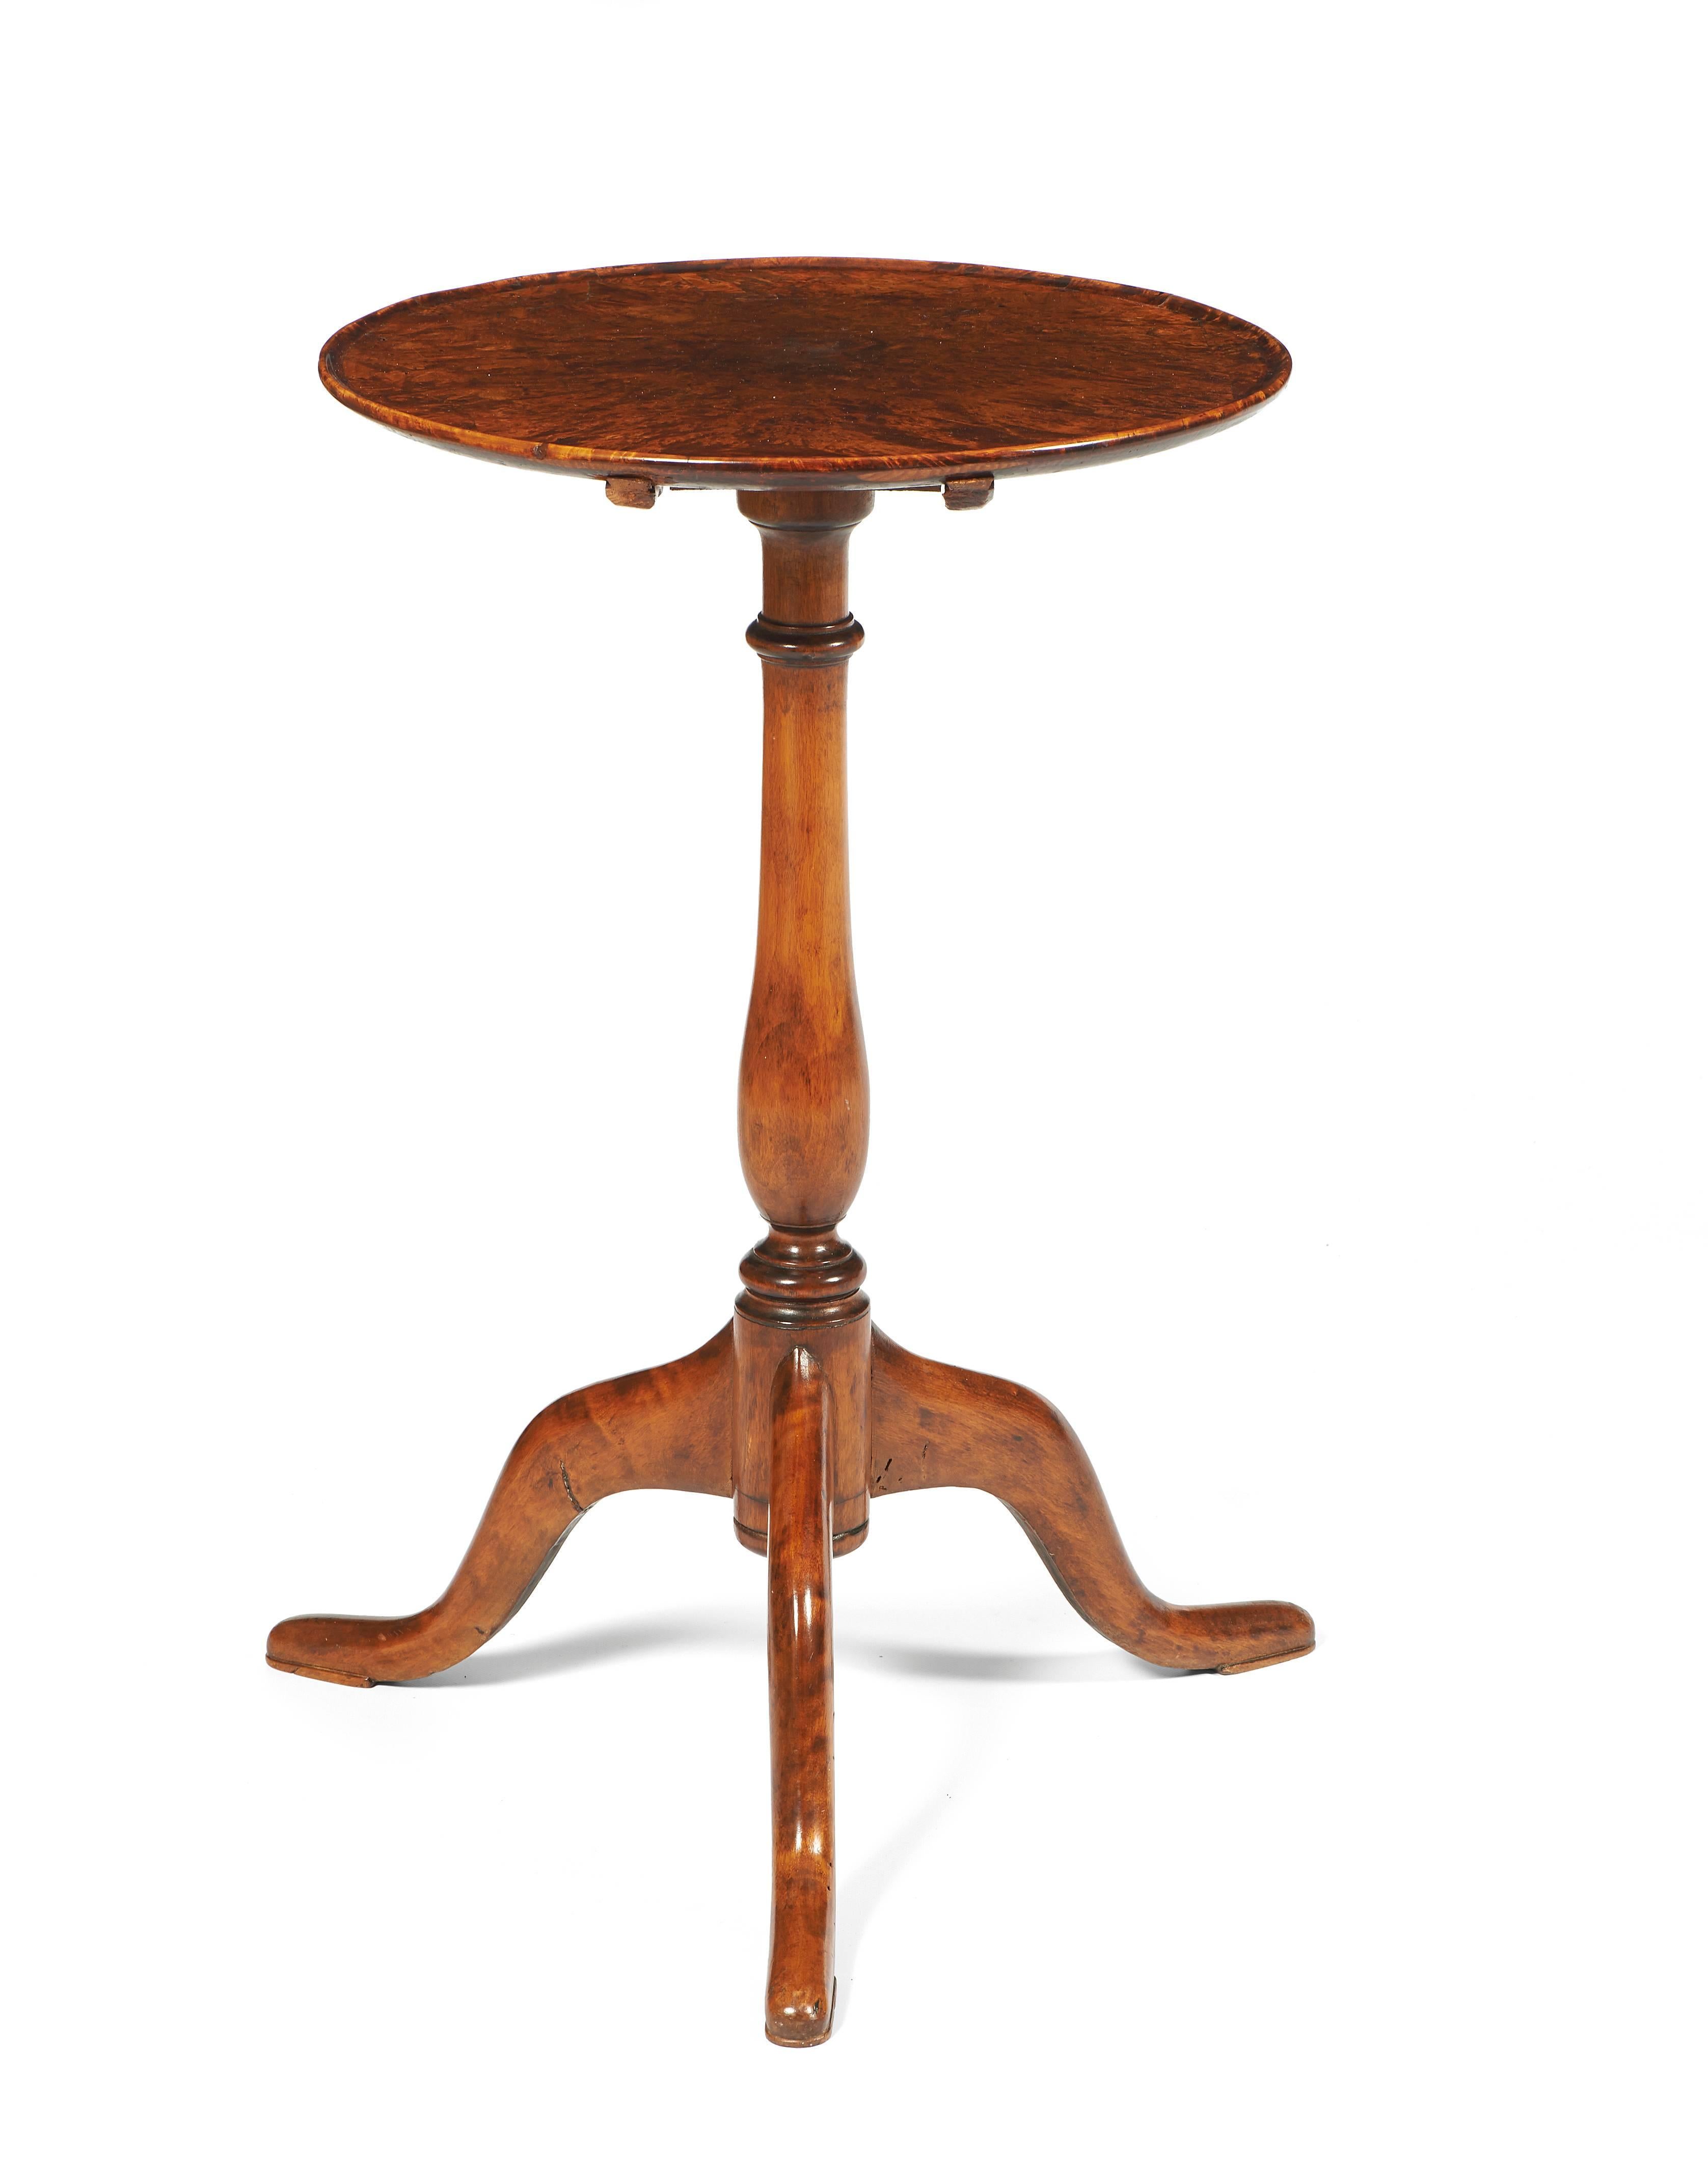 For sale on 1stdibs an 18th Century Swedish Tilt-Top Table by J. Sjölin. This round tilt-top table is veneered in Alder root wood. The  Swedish furniture is usually made in light wood or painted wood to create more bright rooms since in this country